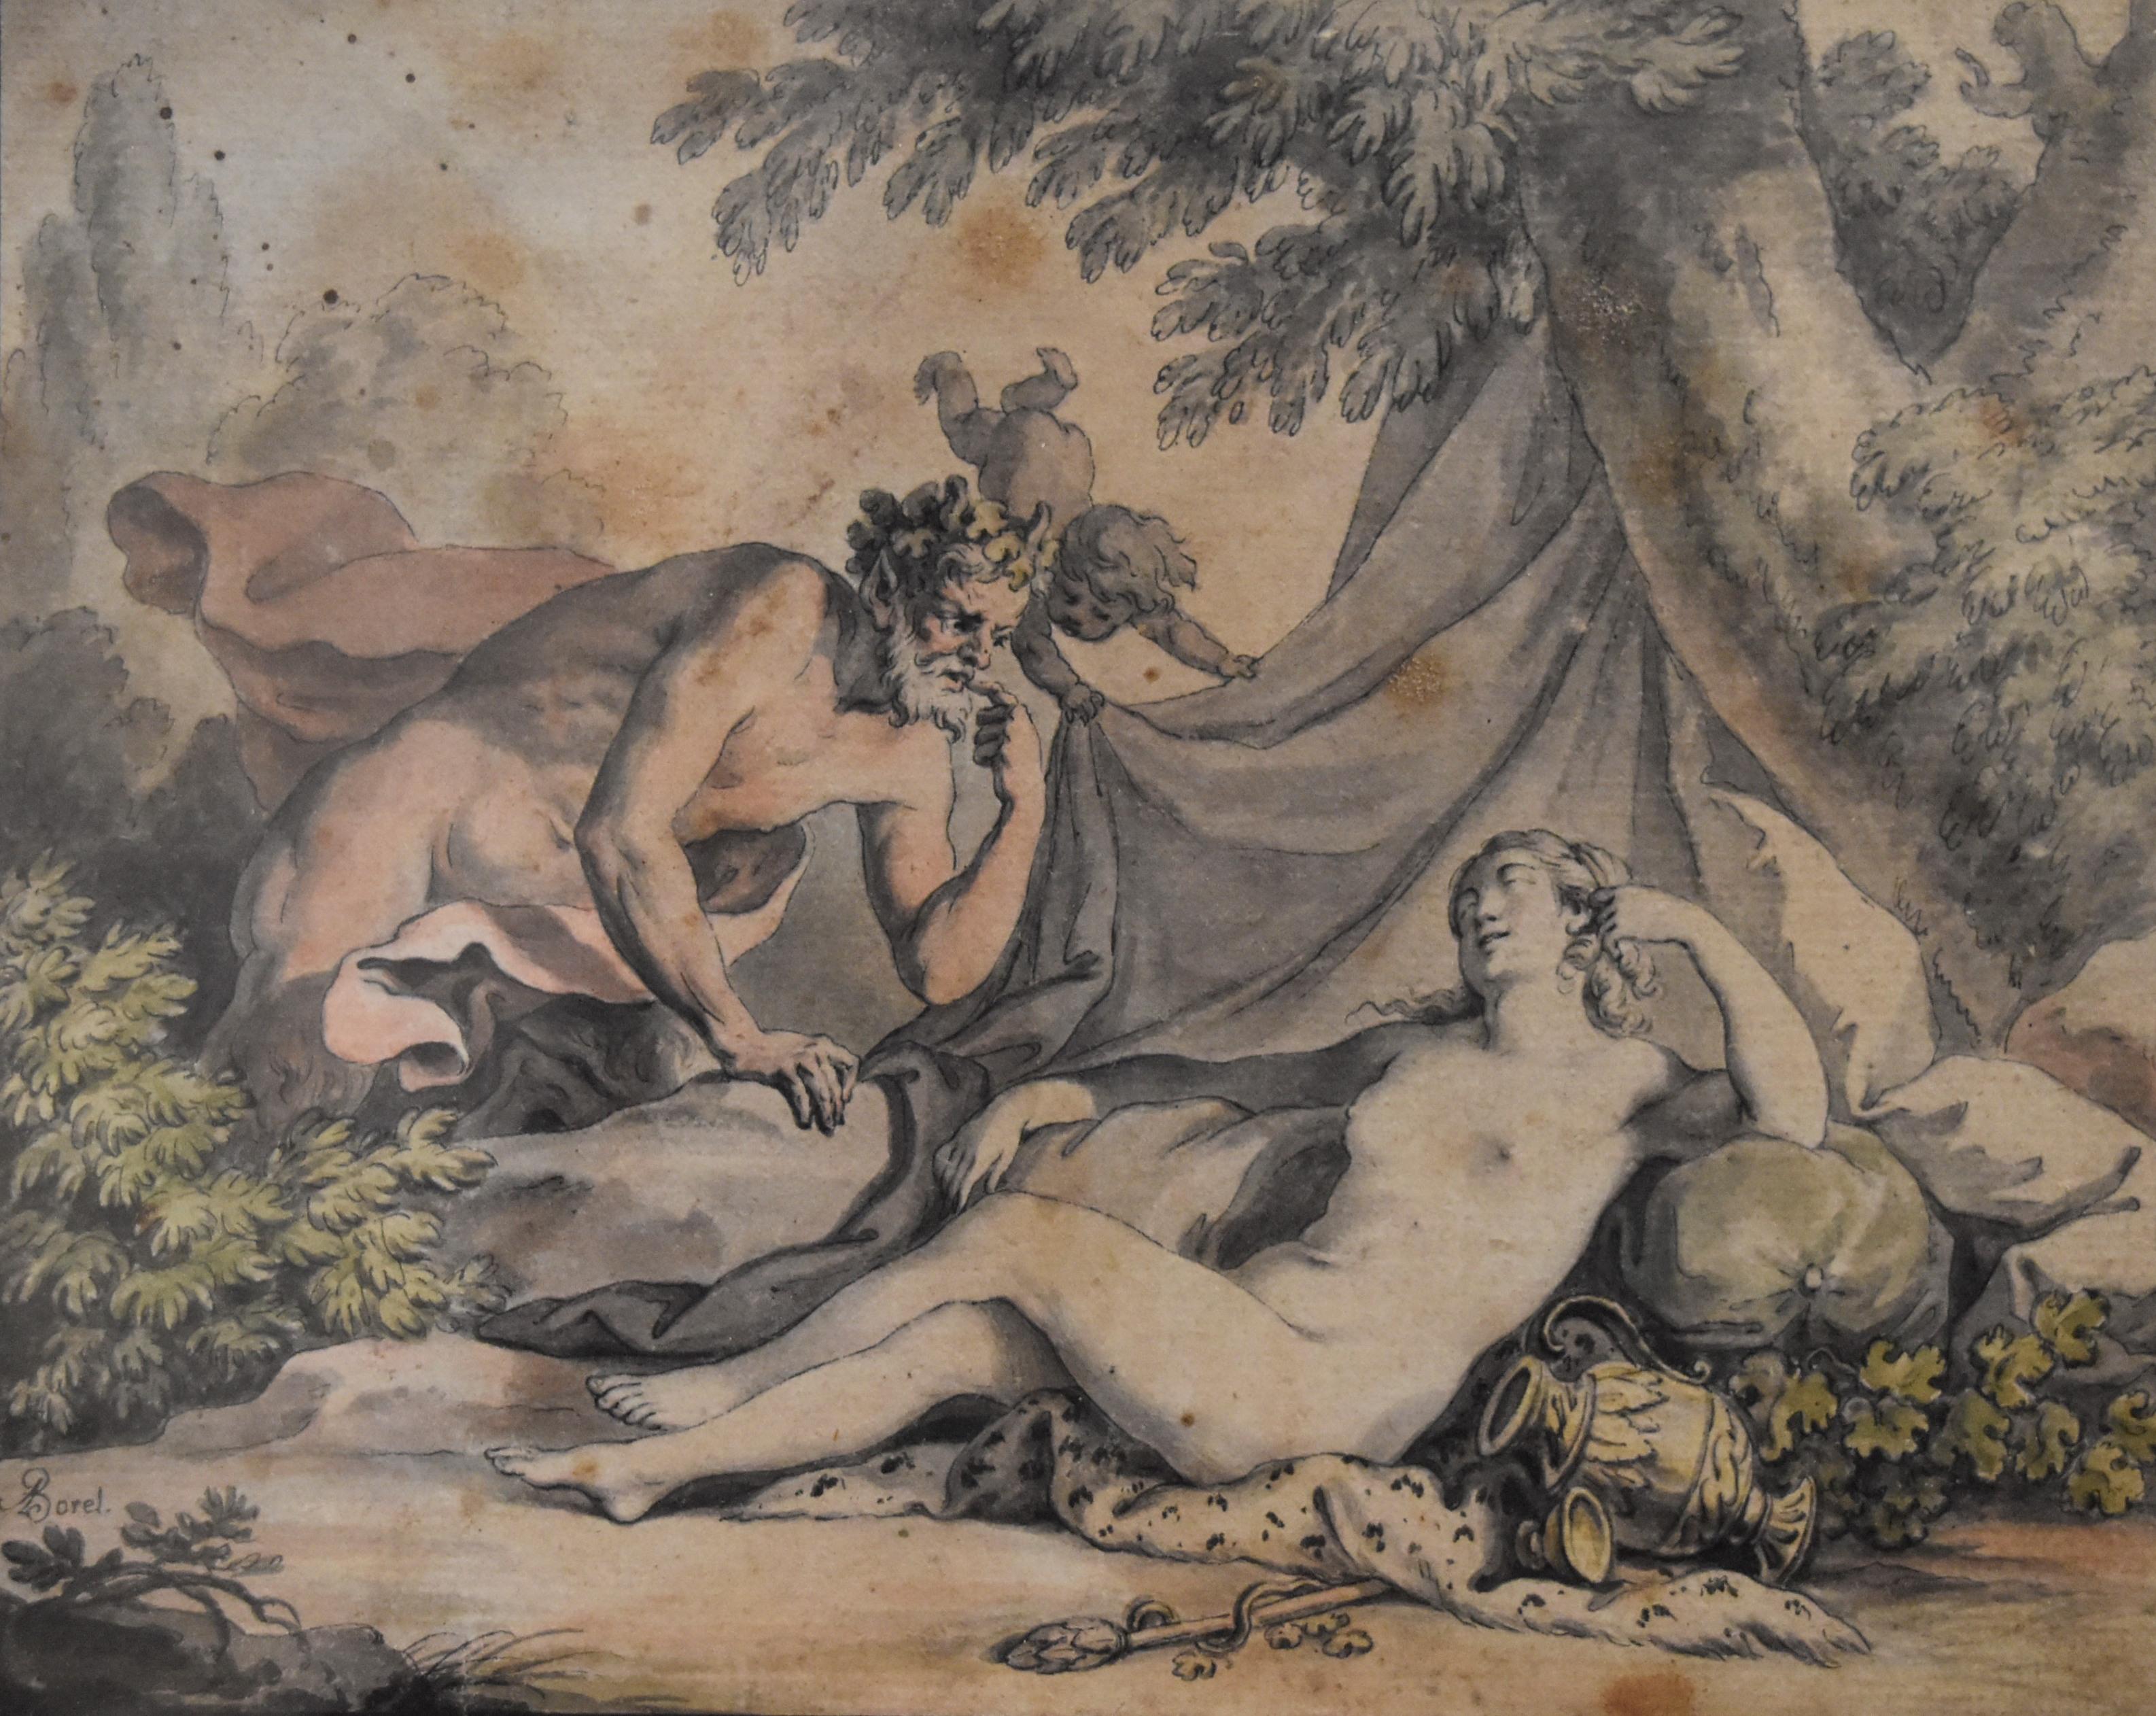 Antoine Borel (1743-1810)
A sleeping Nymph and a Satyr
Signed lower left 
Watercolor on paper
13 x 16.5 cm
Stains and foxings, yellowed (as visible in the pictures)
Framed : 25 x 28 cm. Old framing with losses in the mould, it needs to be changed or